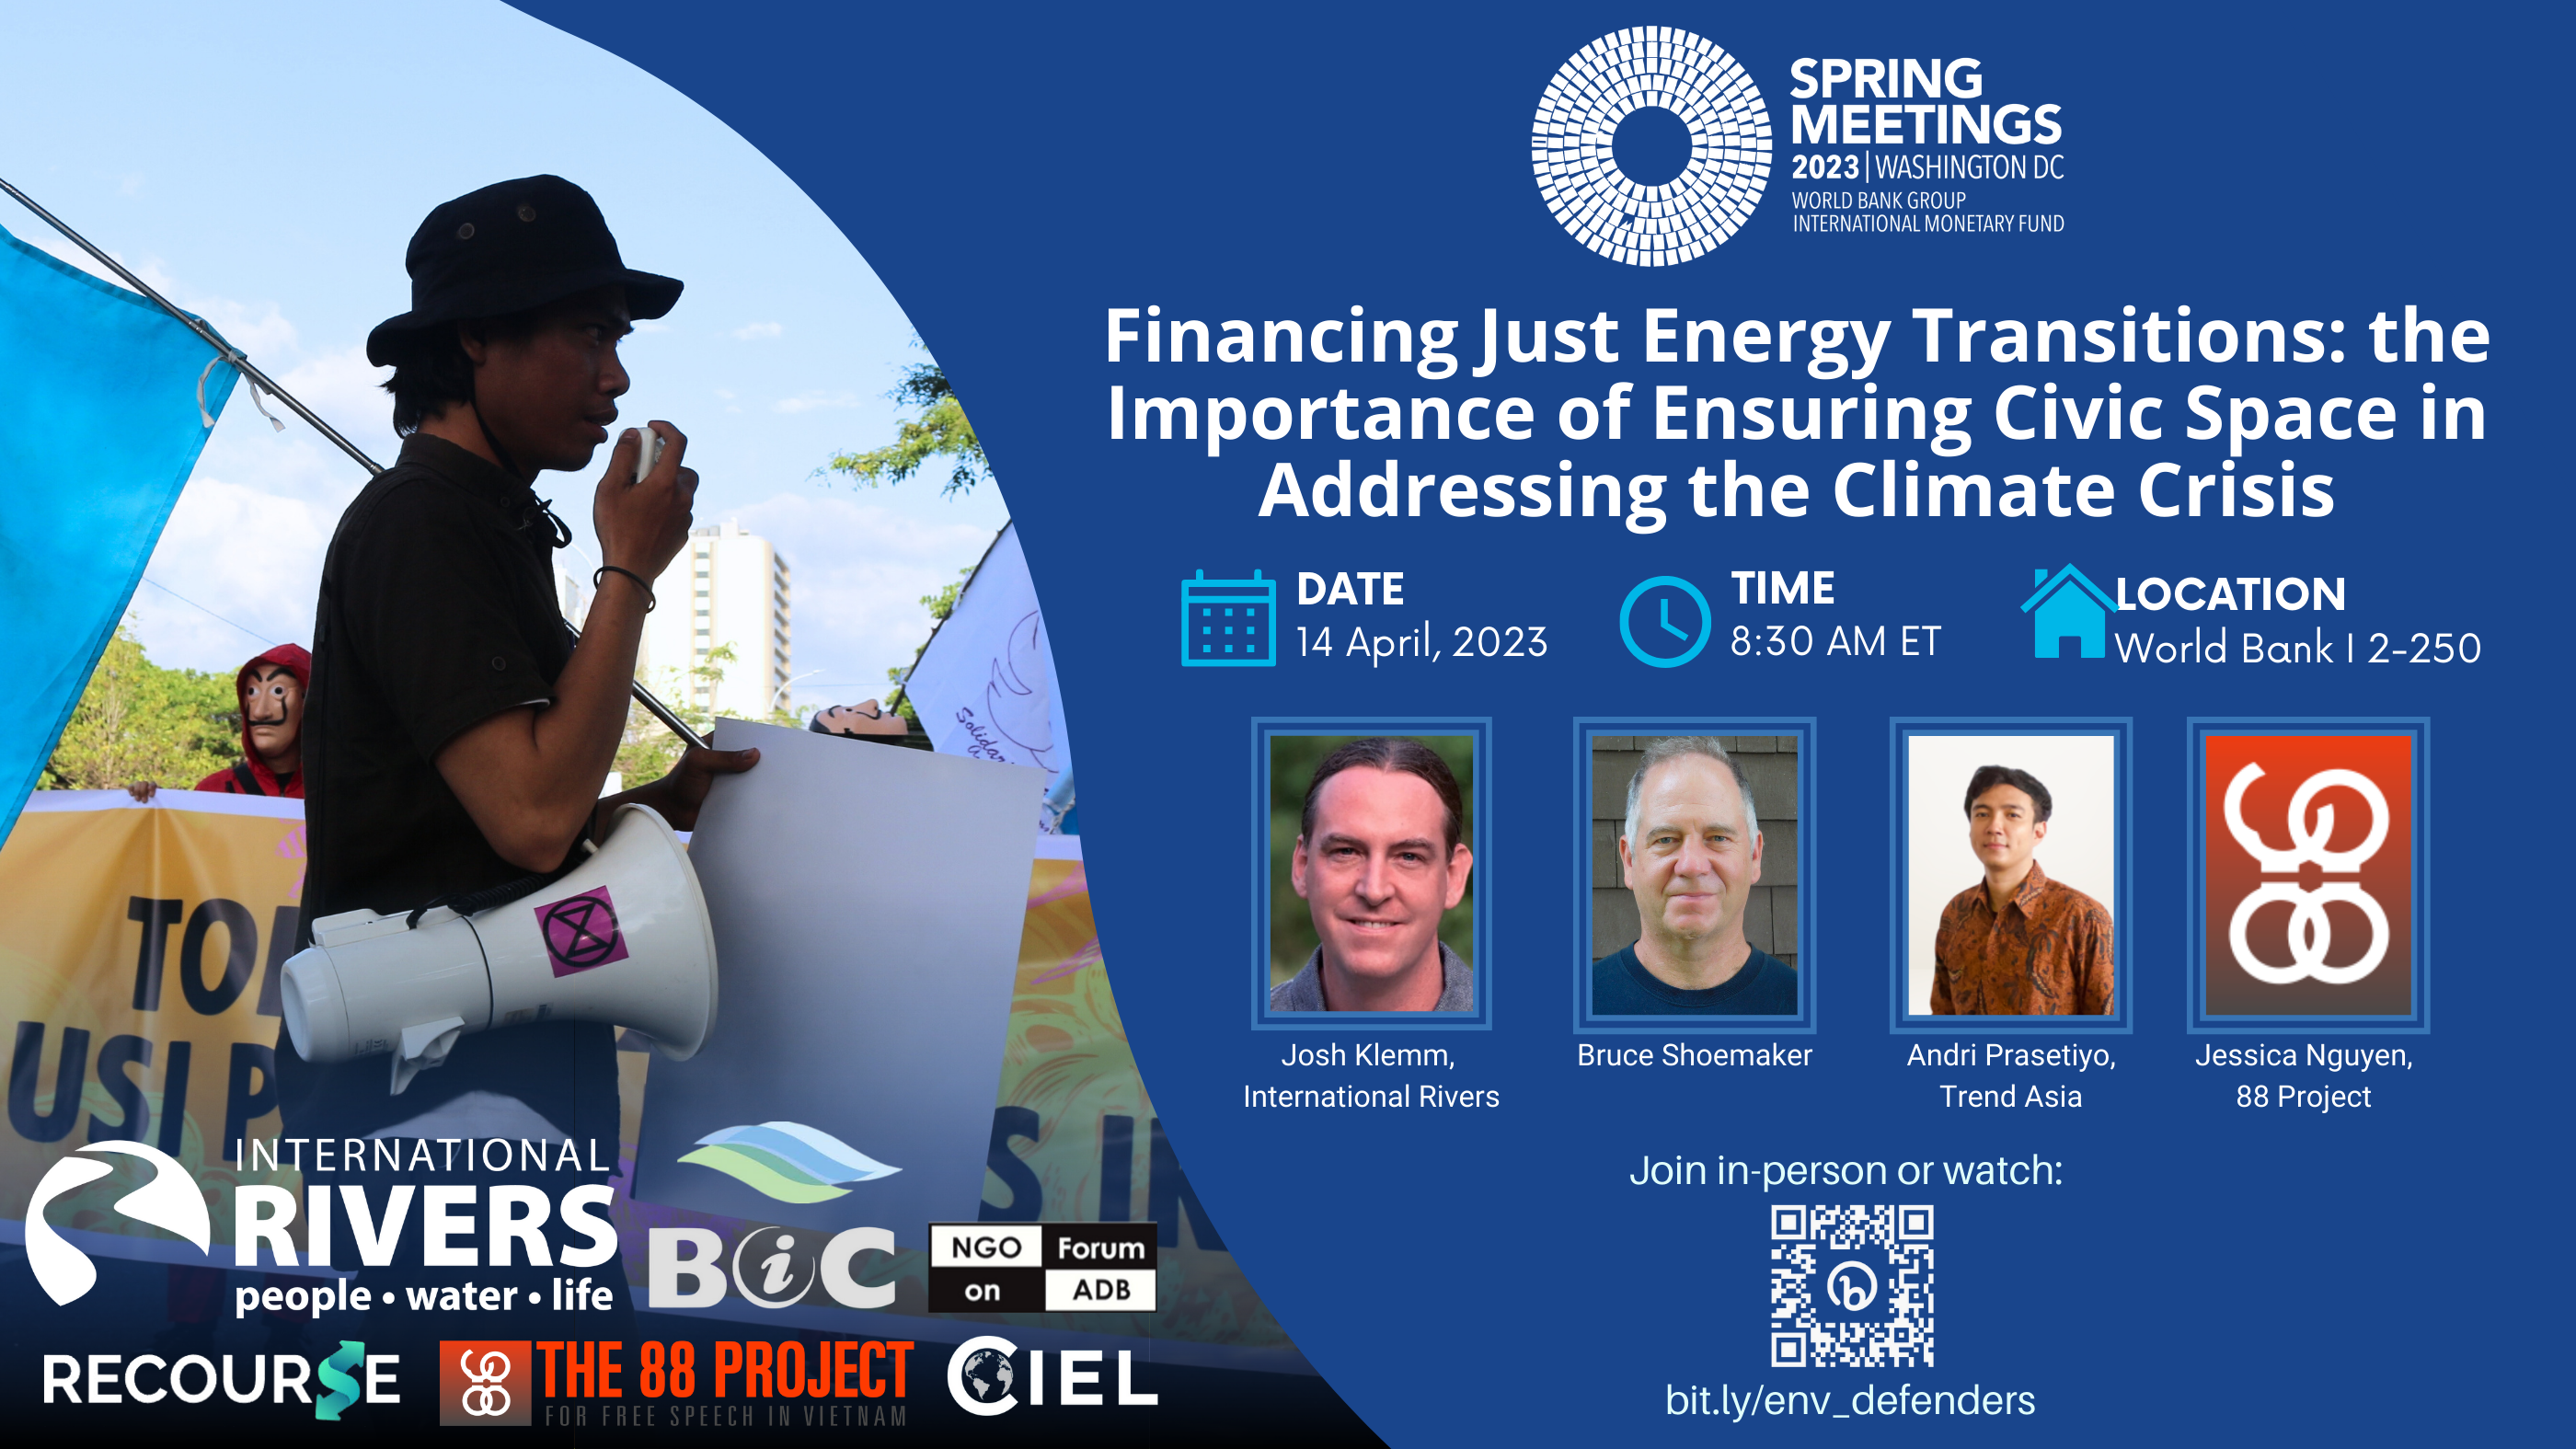 Financing Just Energy Transitions: the Importance of Ensuring Civic Space in Addressing the Climate Crisis event at the World Bank